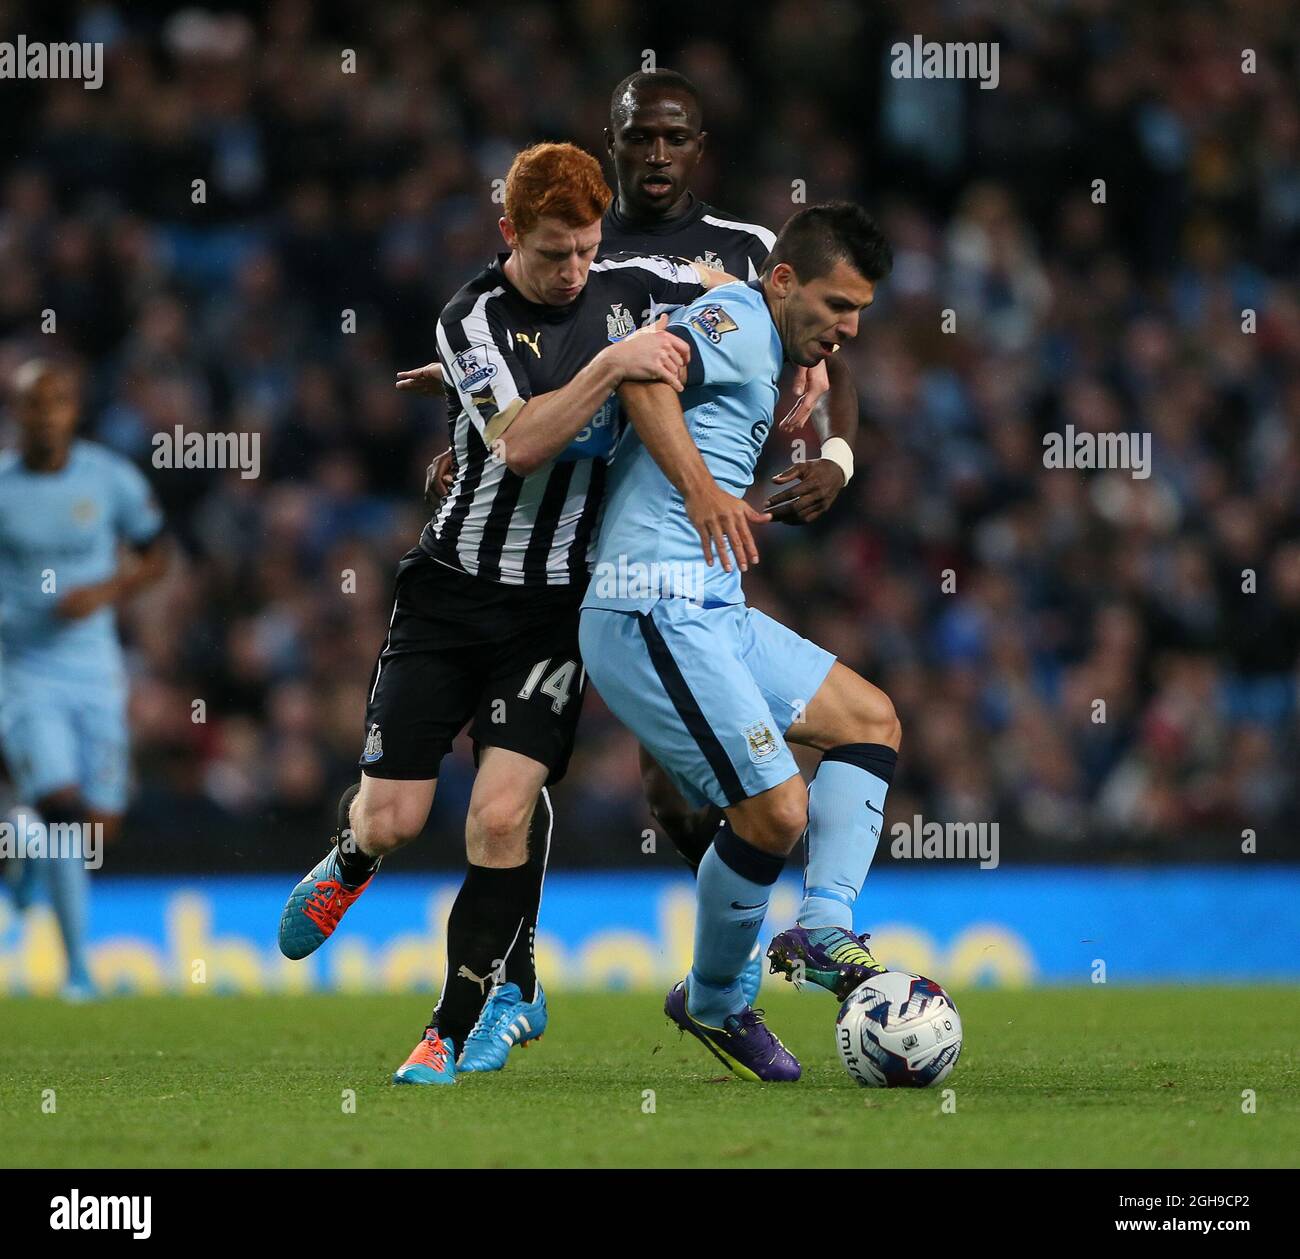 Manchester City's Sergio Aguero tussles with Newcastle's Jack Colback during the Capital One Cup Fourth Round match between Manchester City and Newcastle United at the Etihad Stadium, London on 29, October 2014. Stock Photo